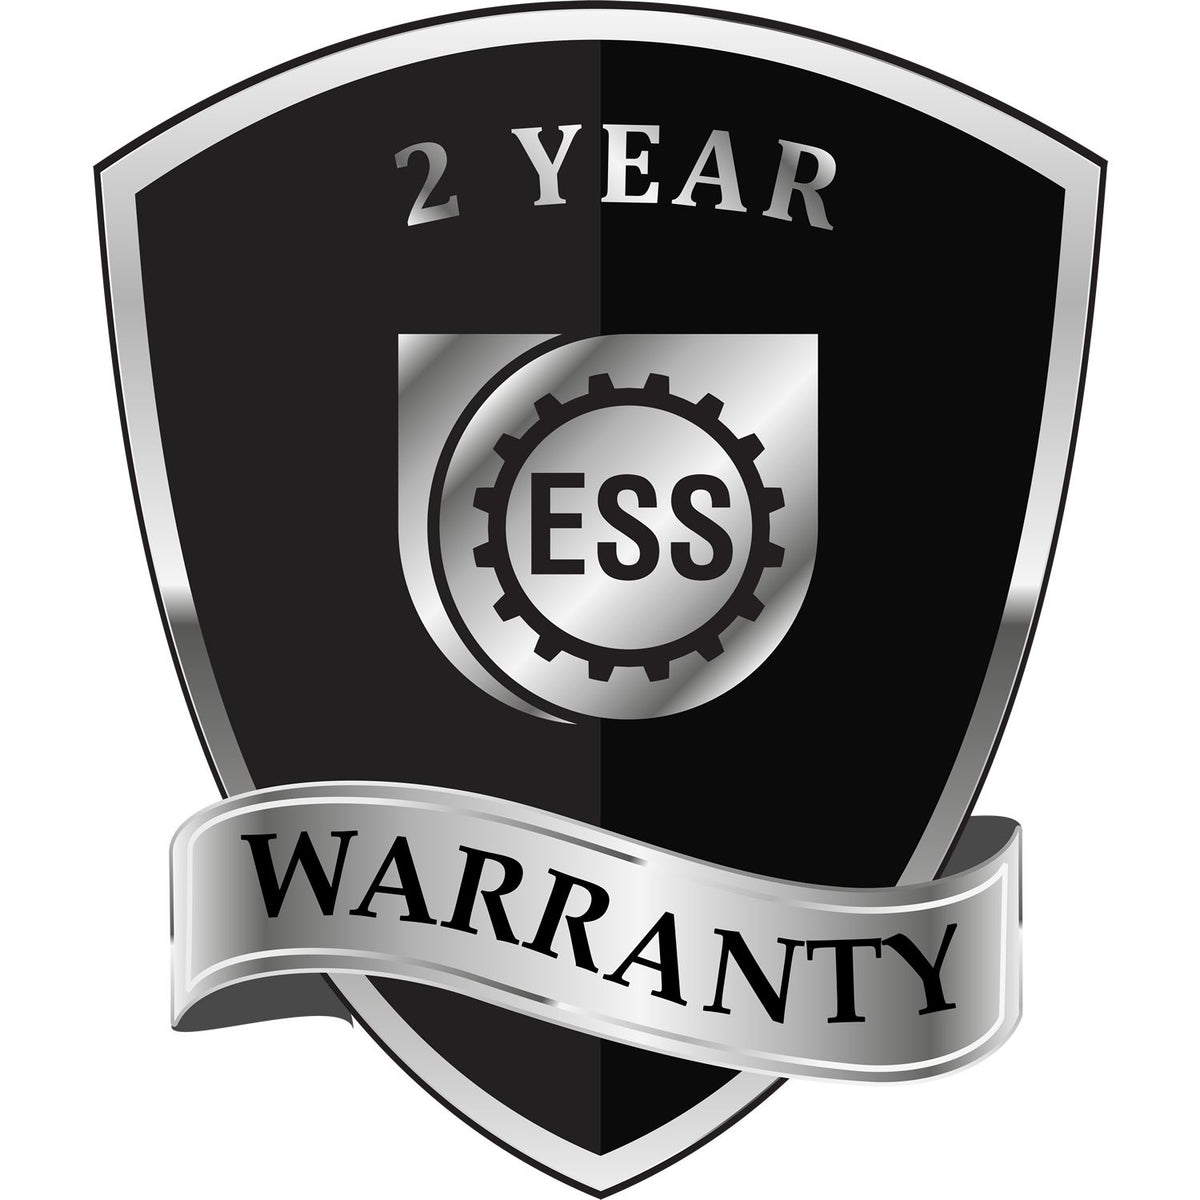 A badge or emblem showing a warranty icon for the Heavy Duty Cast Iron South Carolina Engineer Seal Embosser